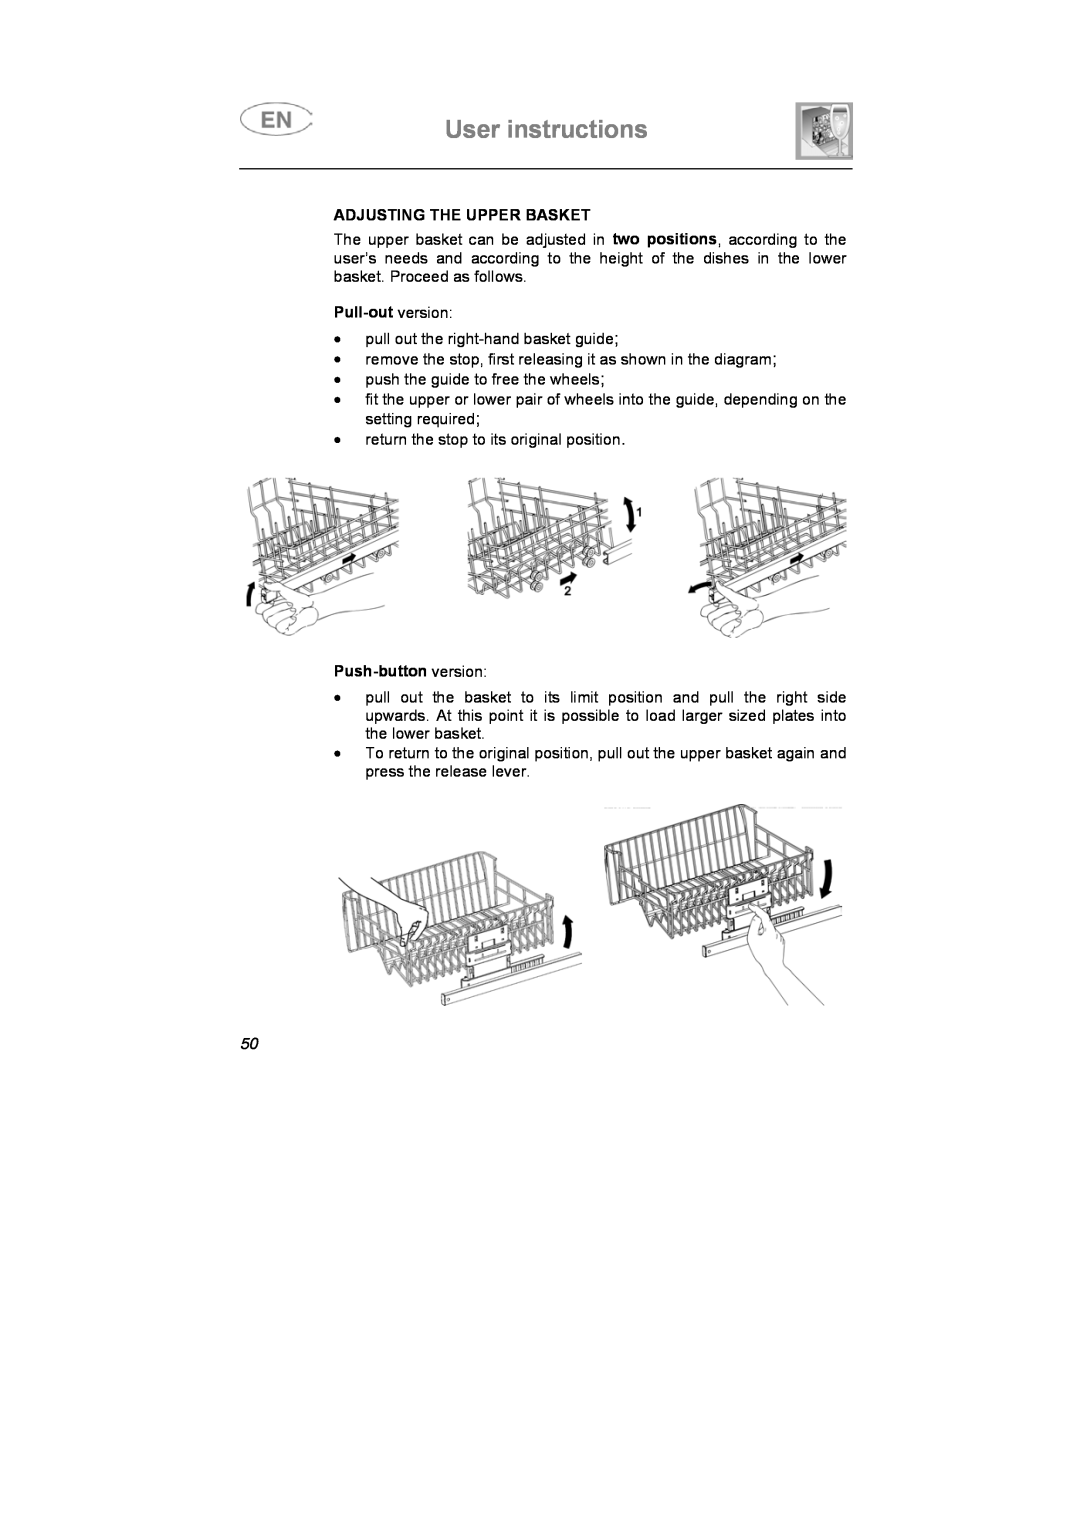 Smeg DD612S7 manual User instructions, Adjusting The Upper Basket, Pull-out version, Push-button version 